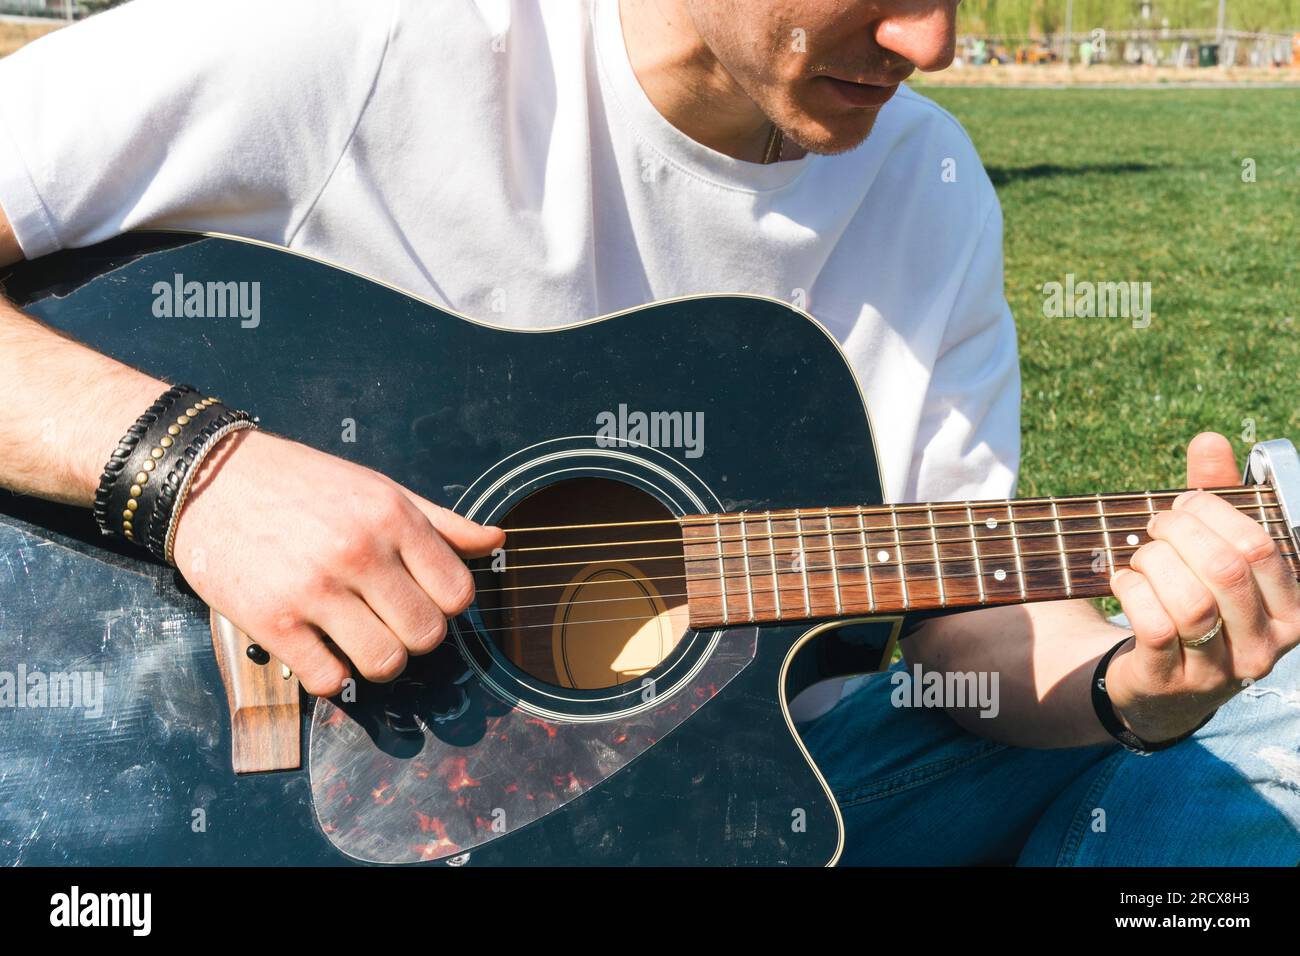 close up of a singer playing guitar in a garden during a sunny day Stock Photo